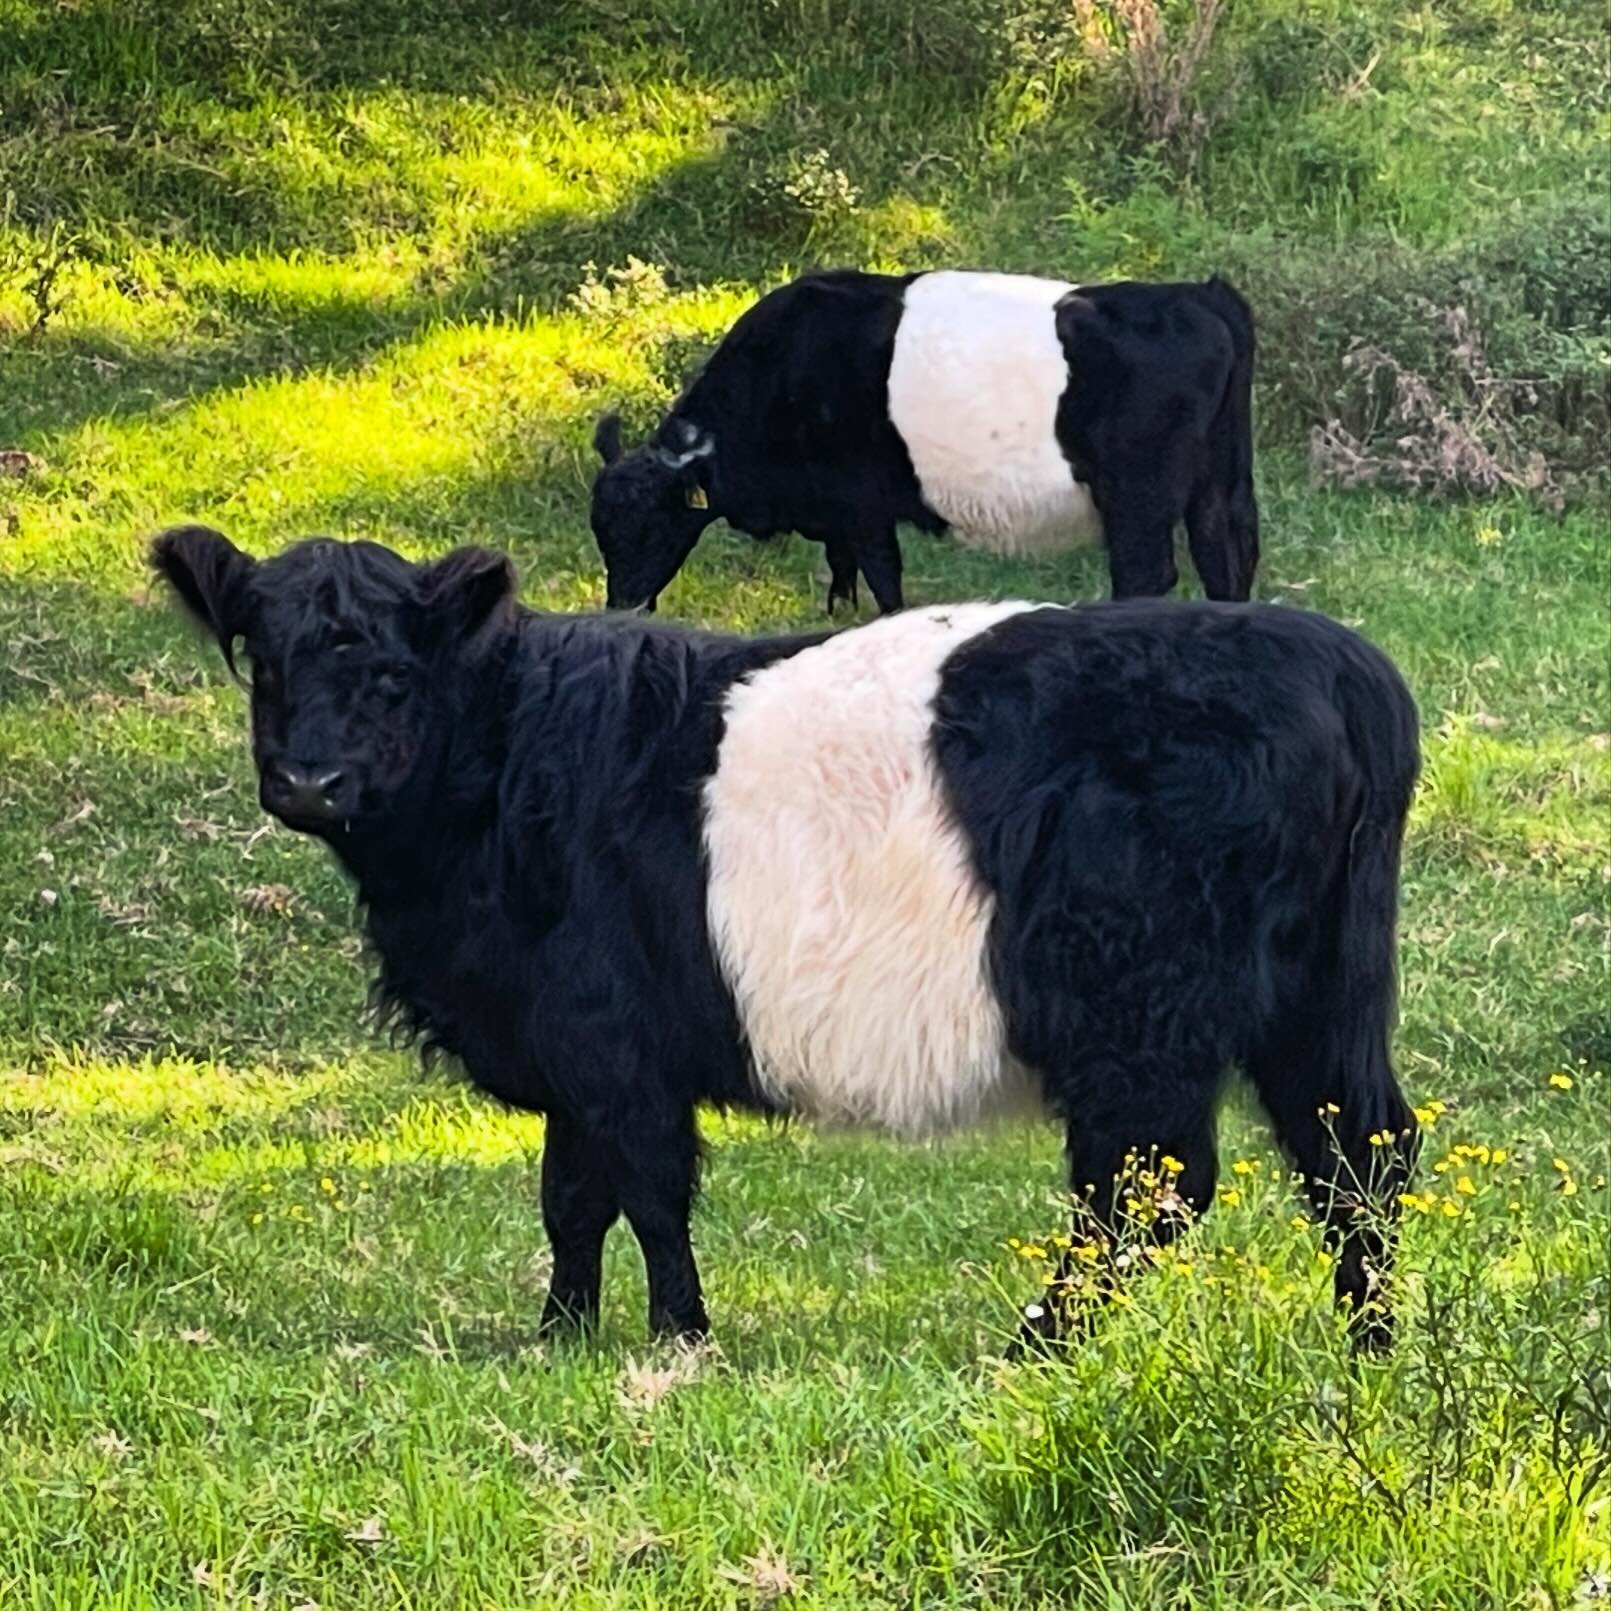 Aren't these just the cutest cows ever? Sharing my writing retreat with these saddlebacks.